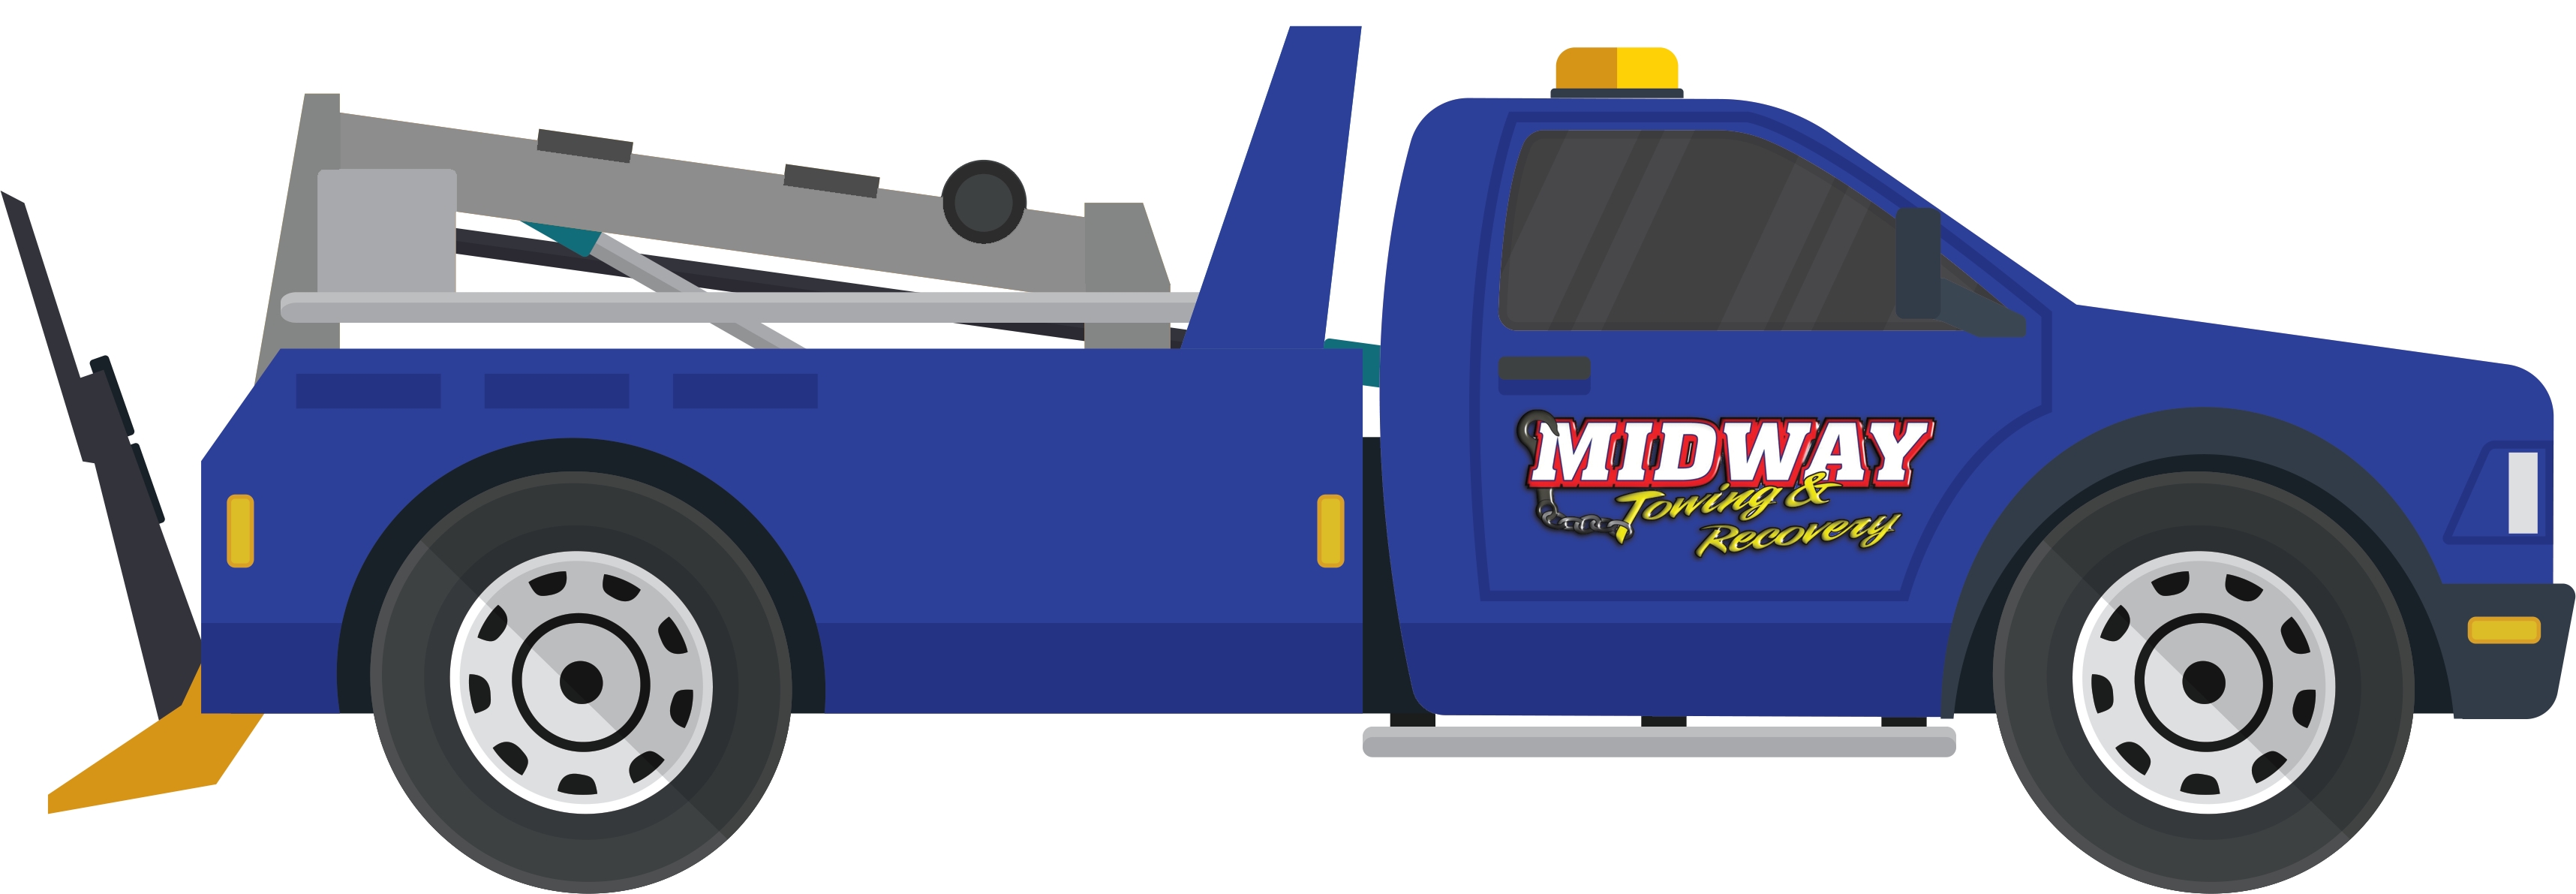 Midway Towing & Recovery stands ready to help you whenever boat towing towing in the Richmond, Virginia area is needed.